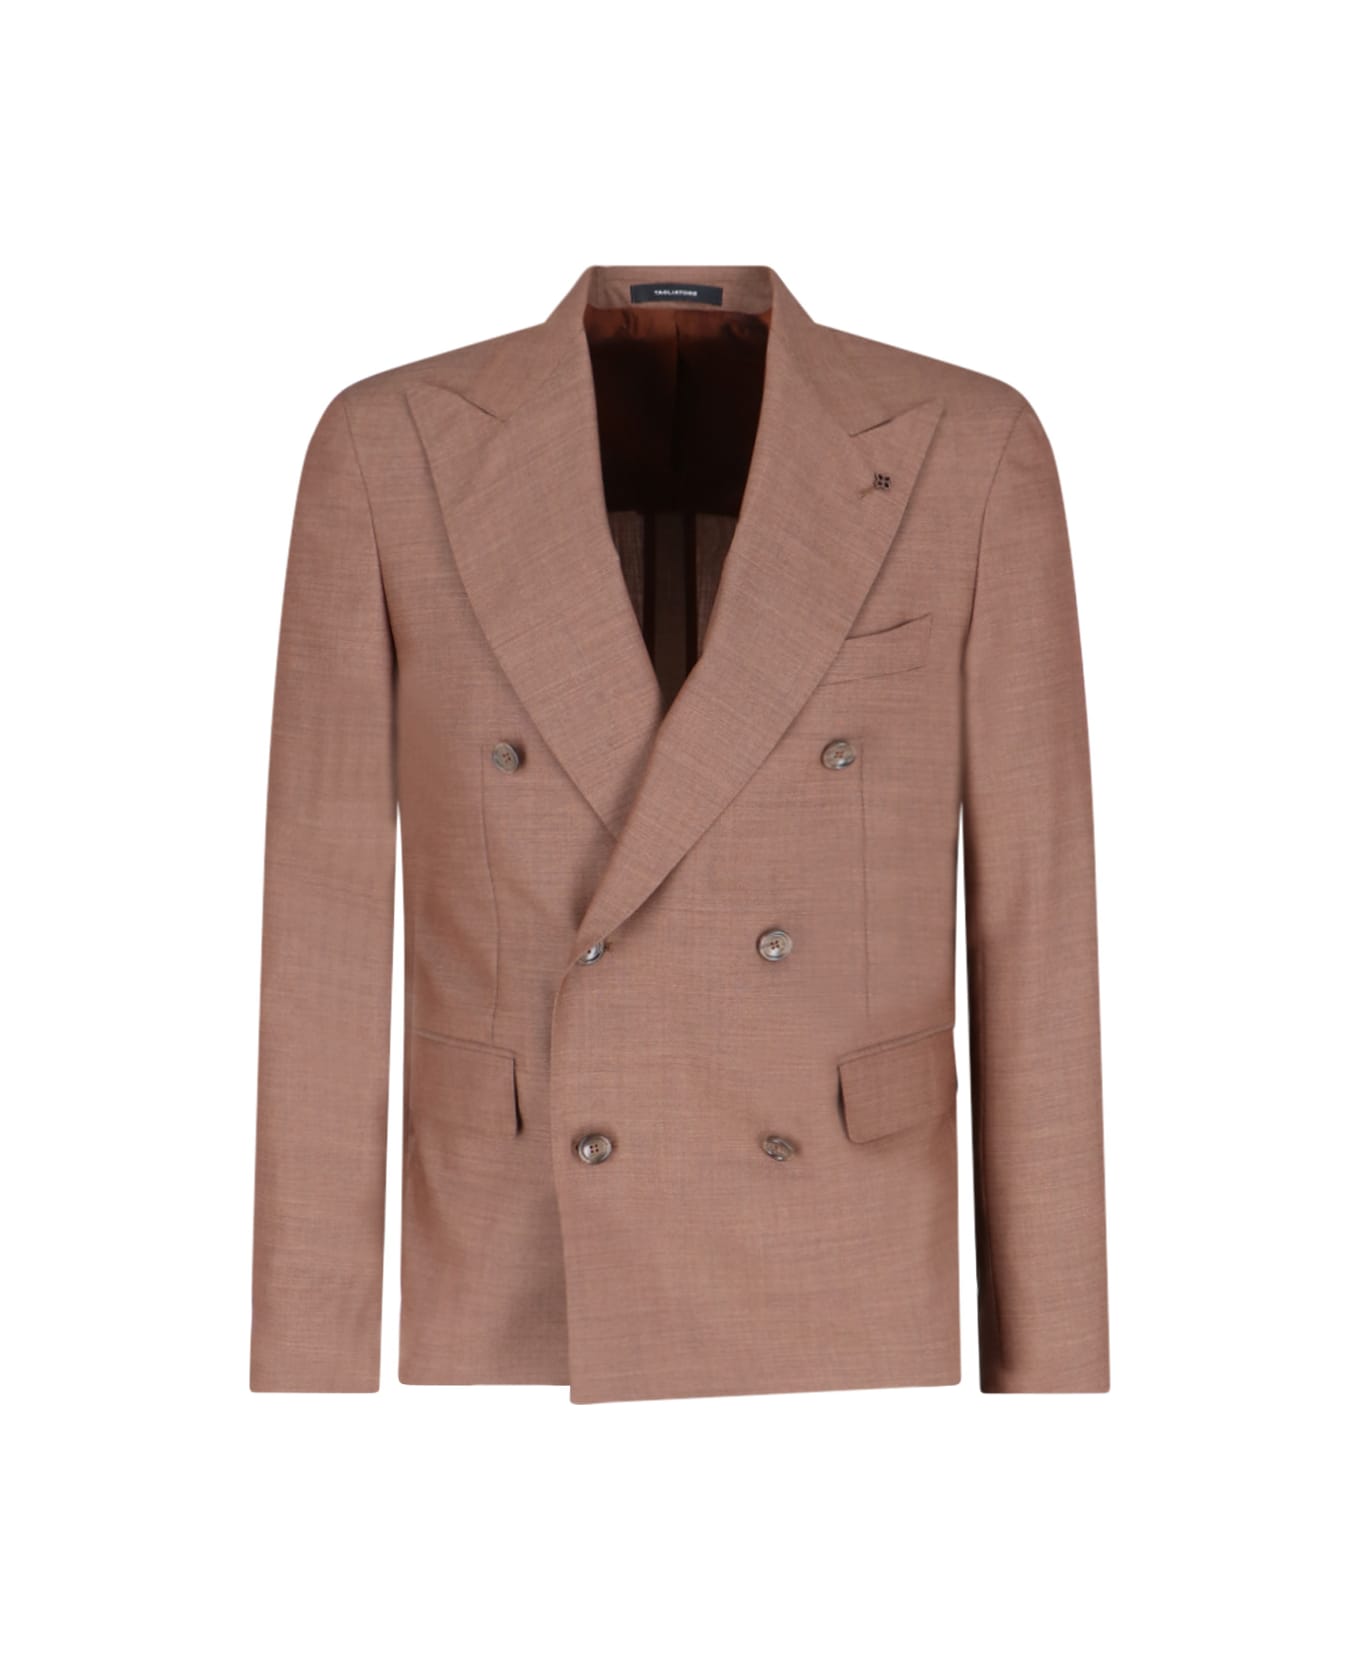 Tagliatore Double-breasted Suit - K1070 スーツ